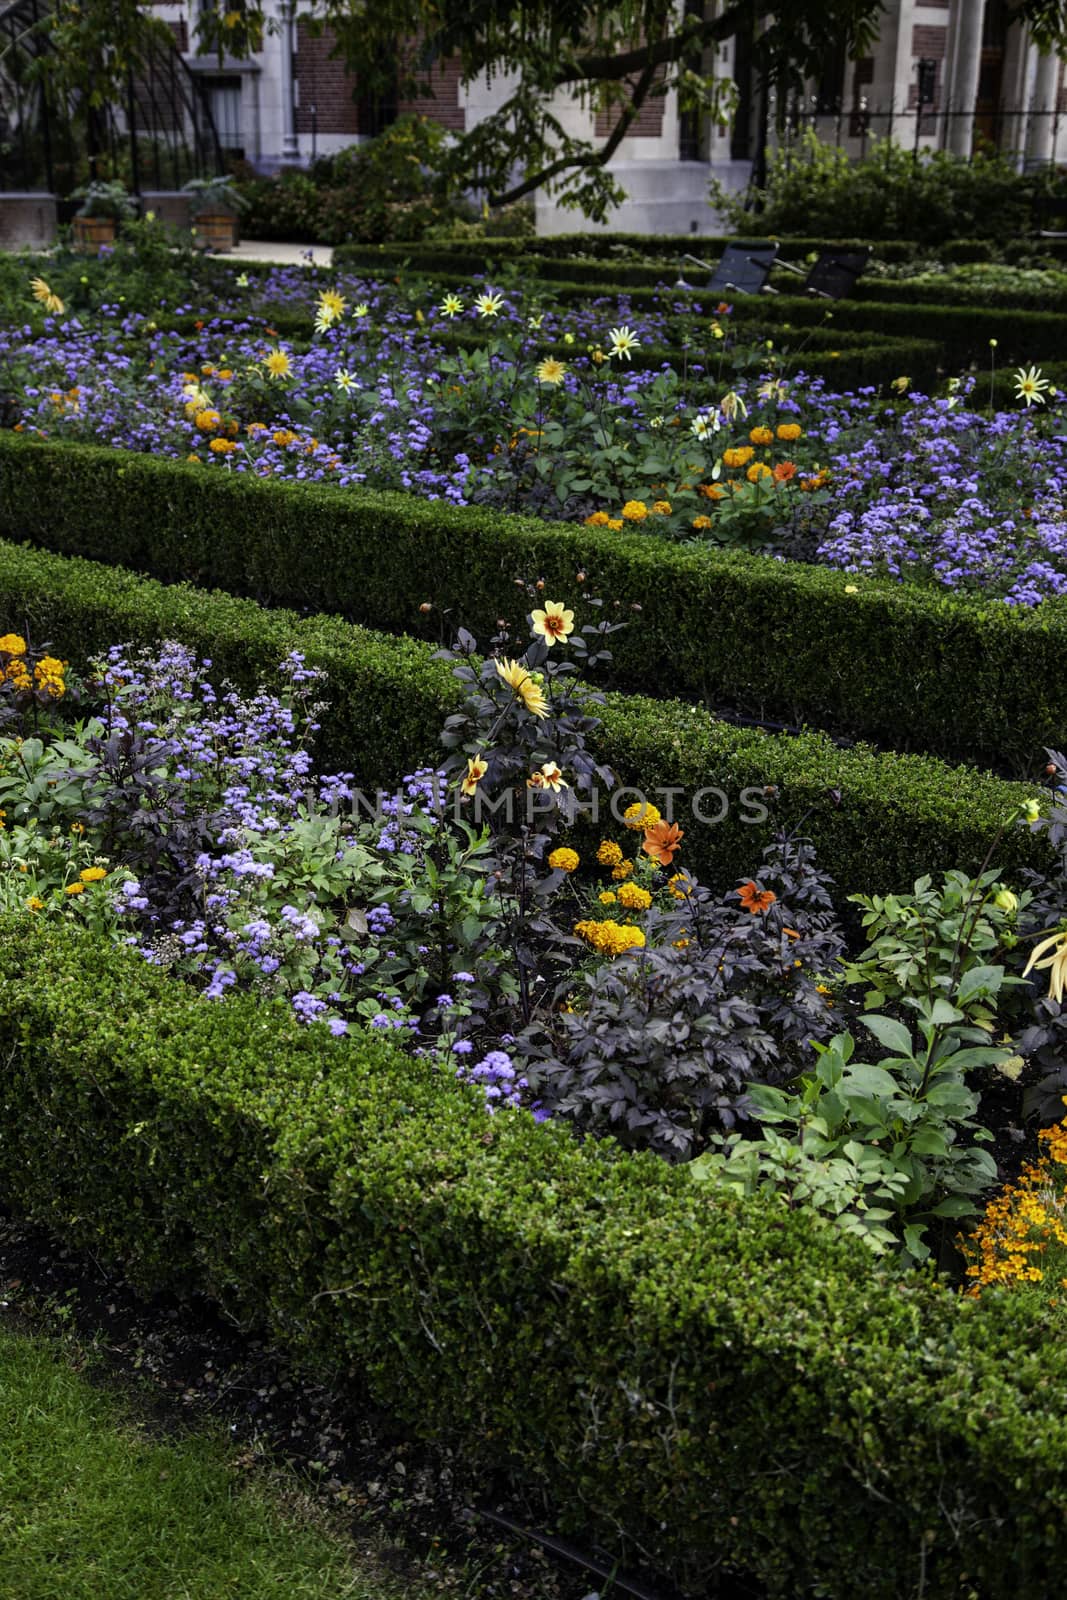 Amsterdam garden, detail of flowers and tulips